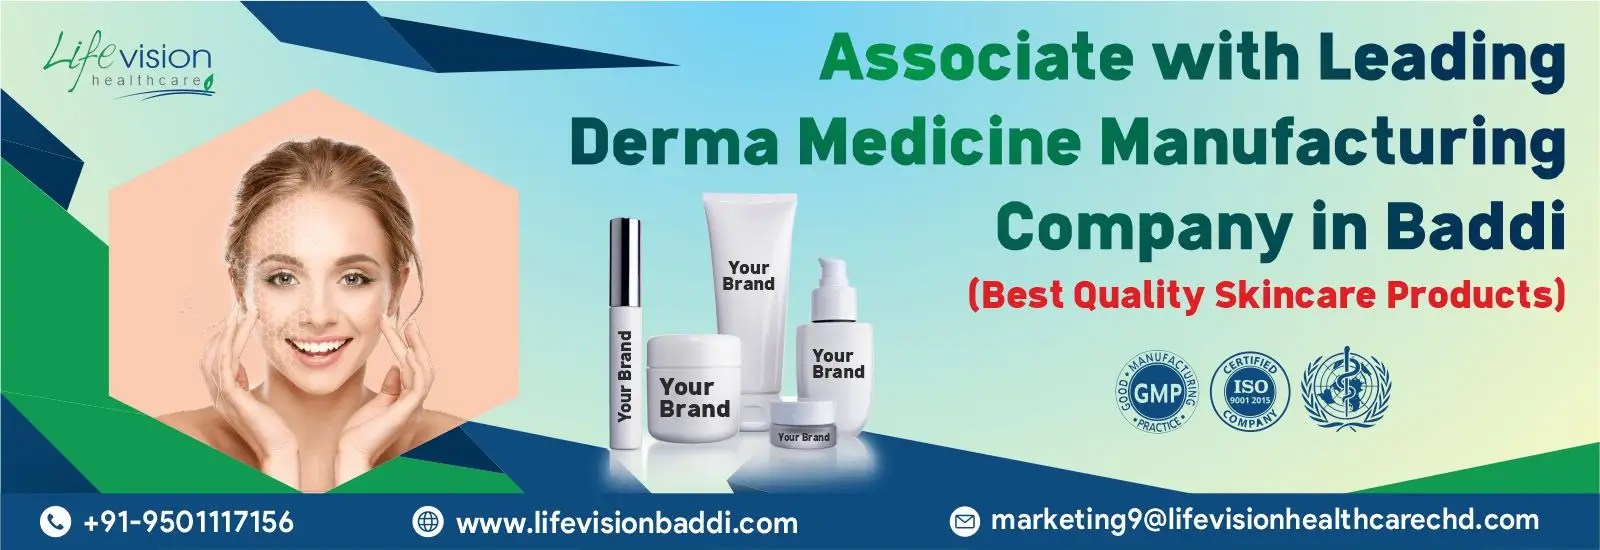 Derma Products Manufacturer in Baddi, Emphasizing Skin Protection and Glowing | Lifevision Healthcare